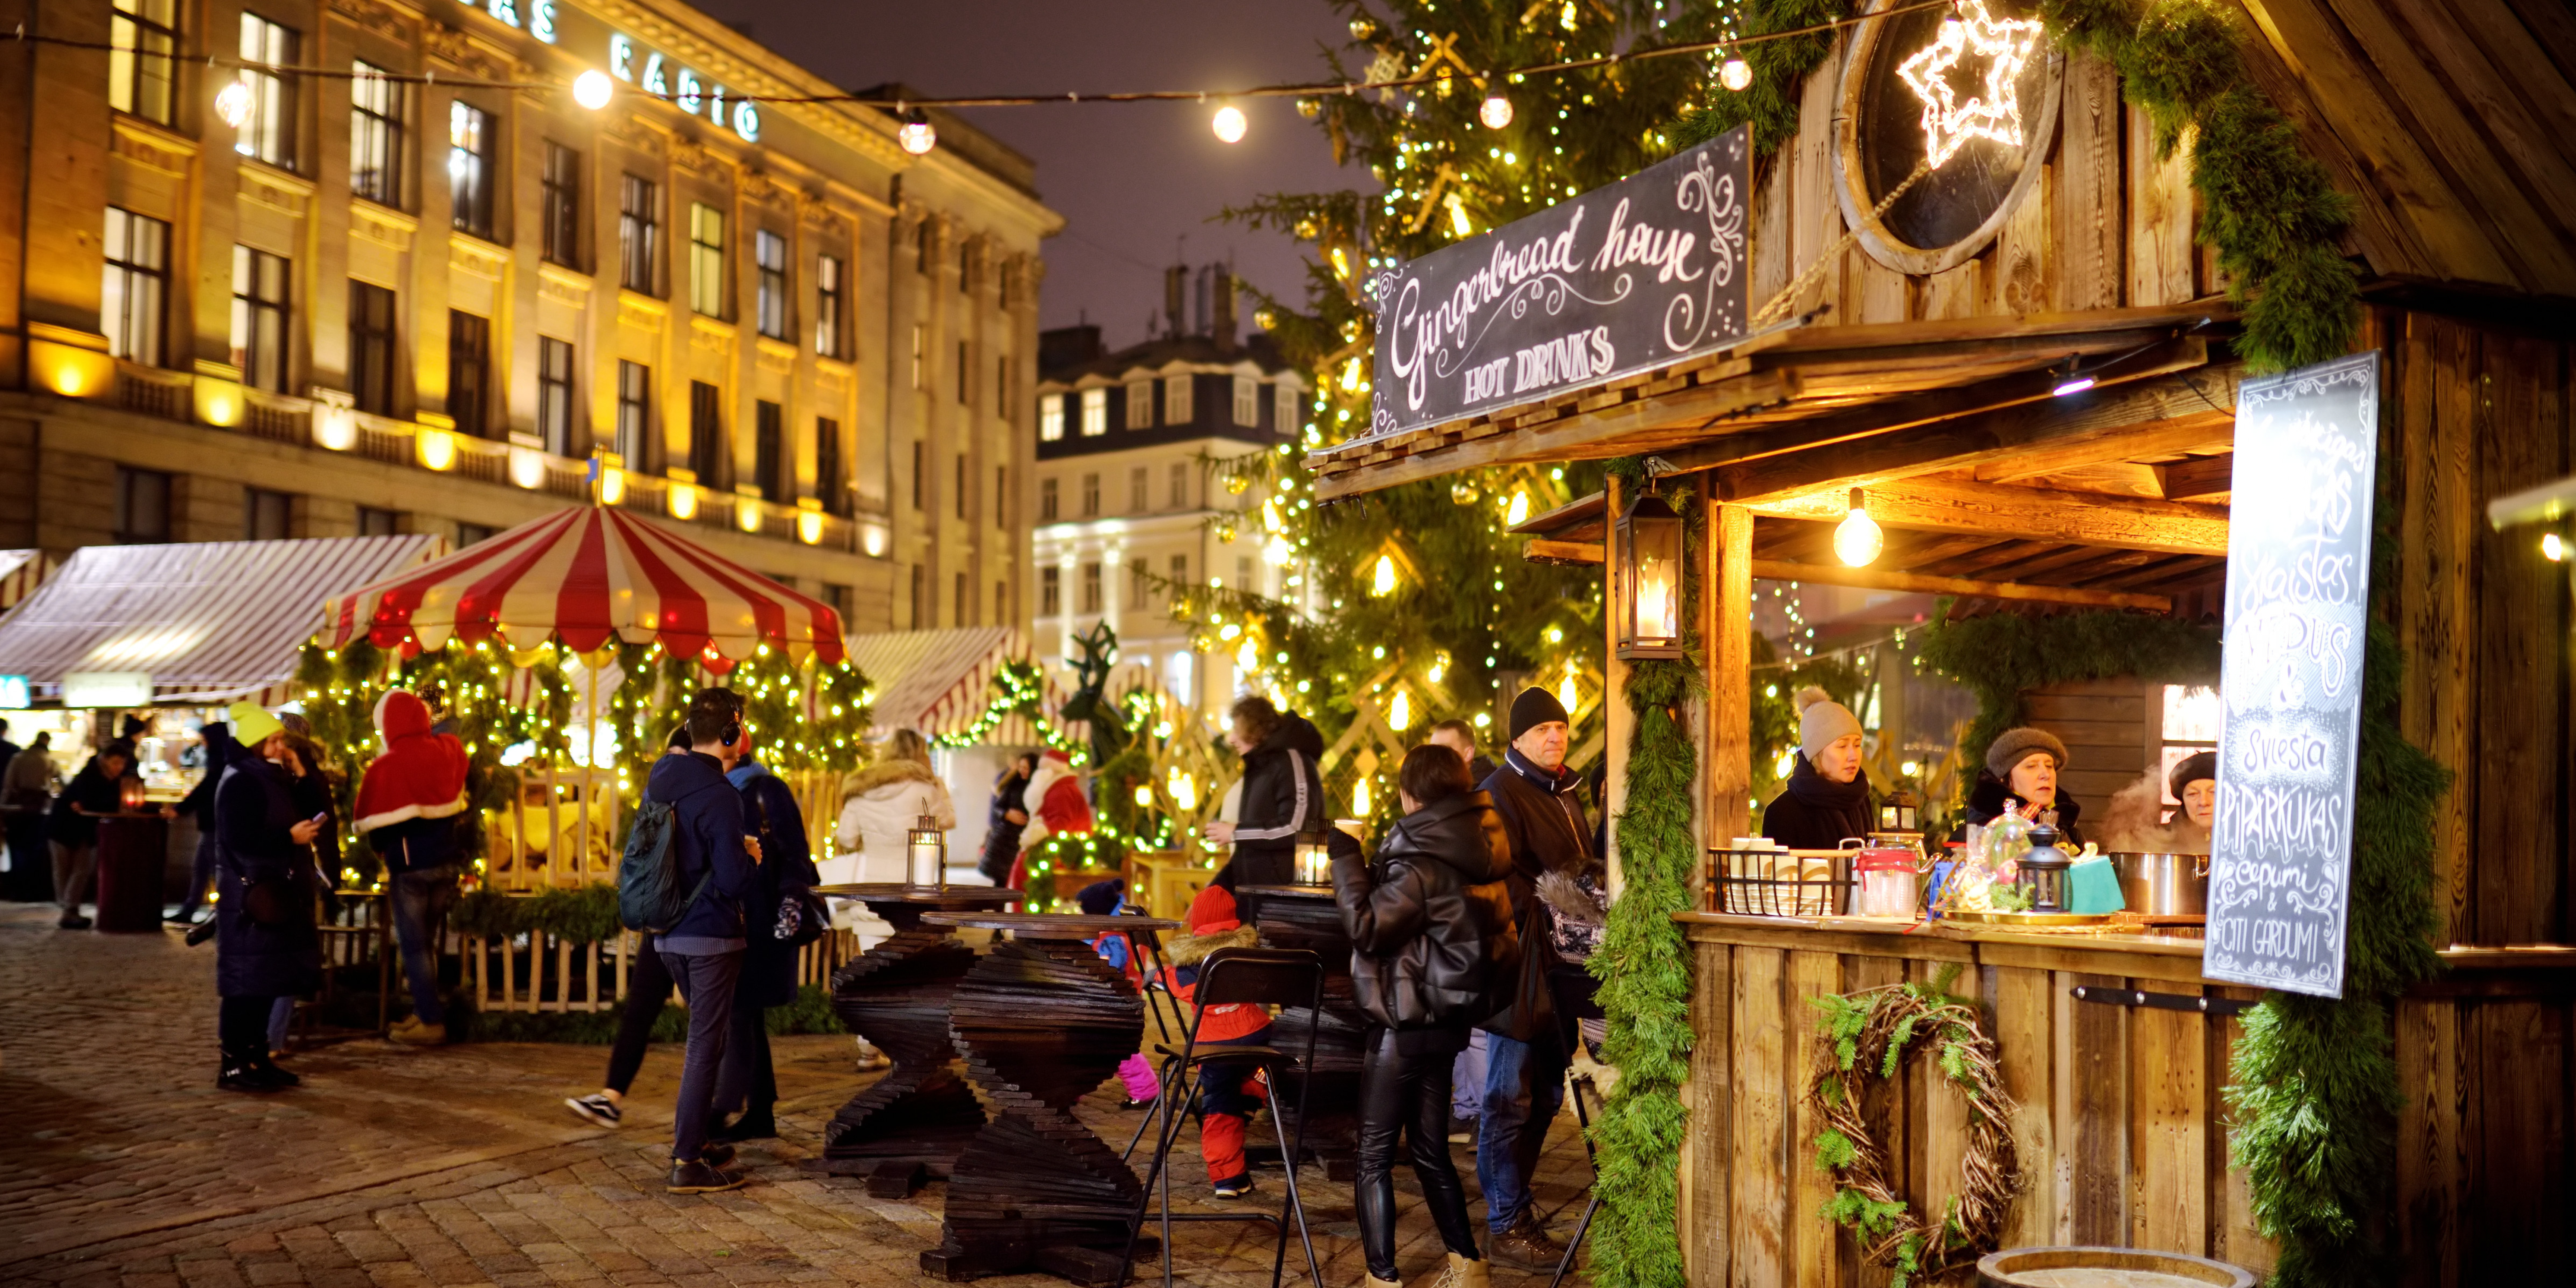 4 Christmas markets accessible by train in France, Belgium, Spain and Switzerland